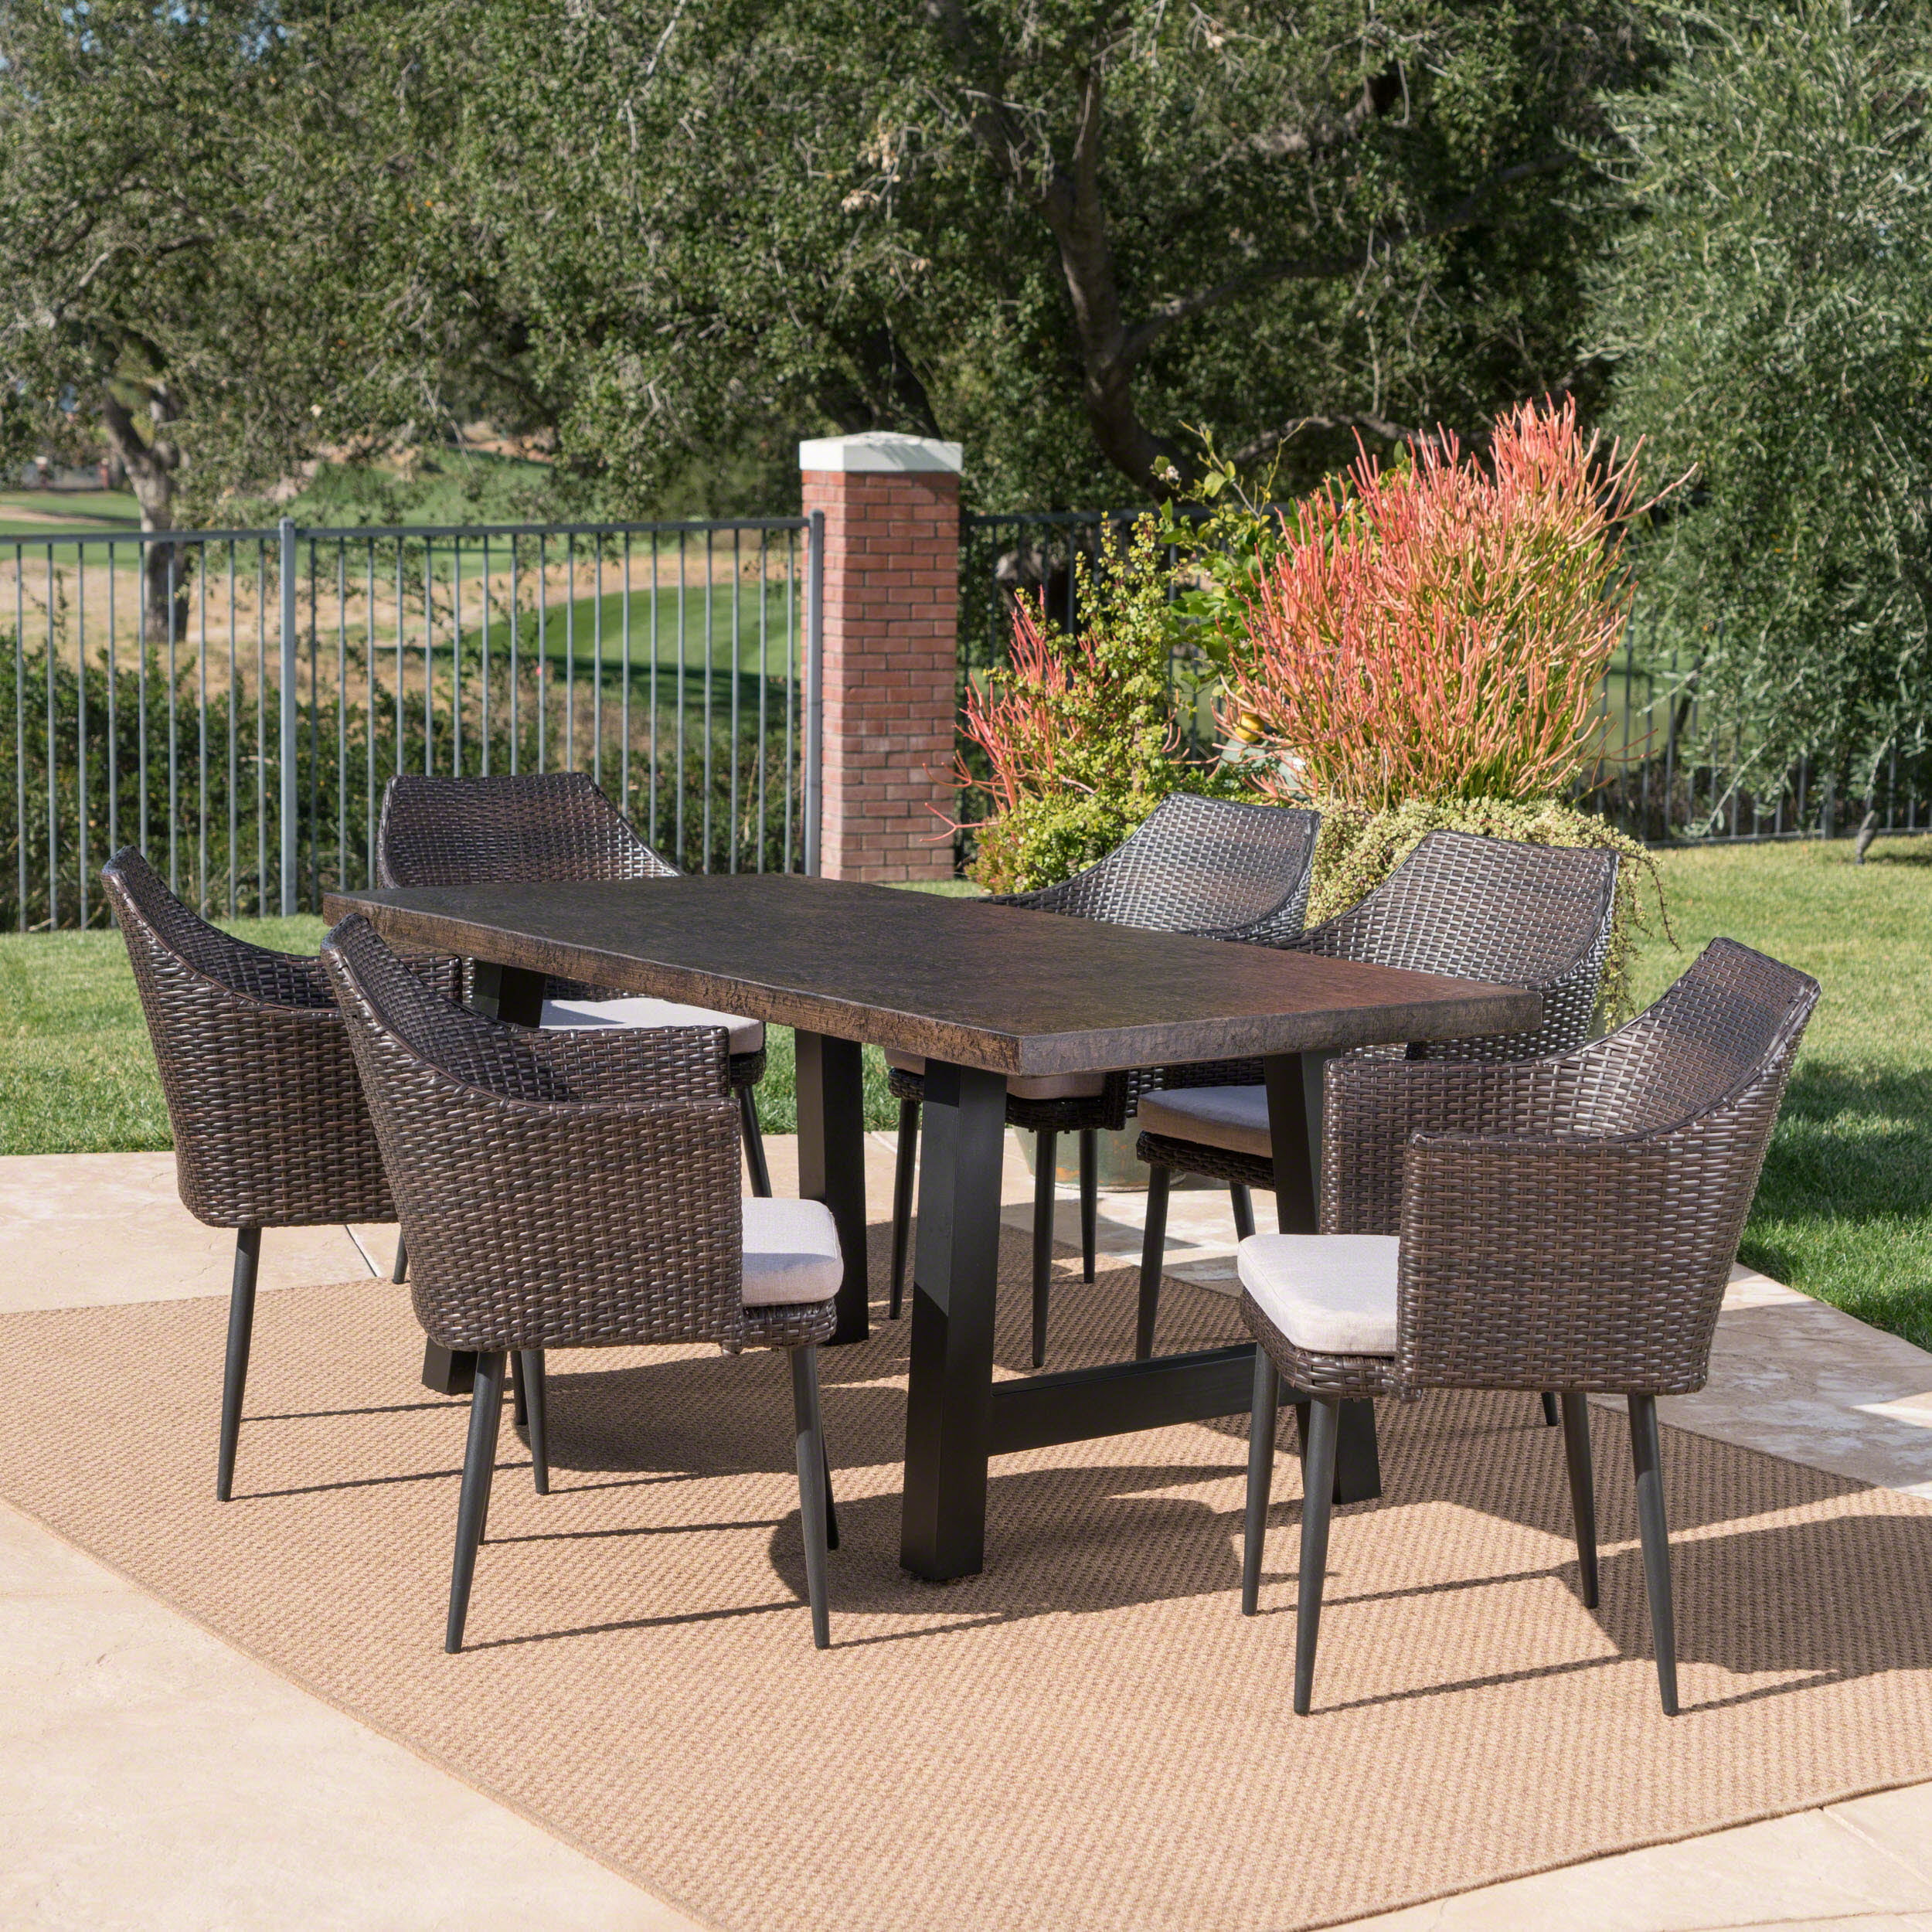 Porter Outdoor 7 Piece Wicker Dining Set with Light Weight ...